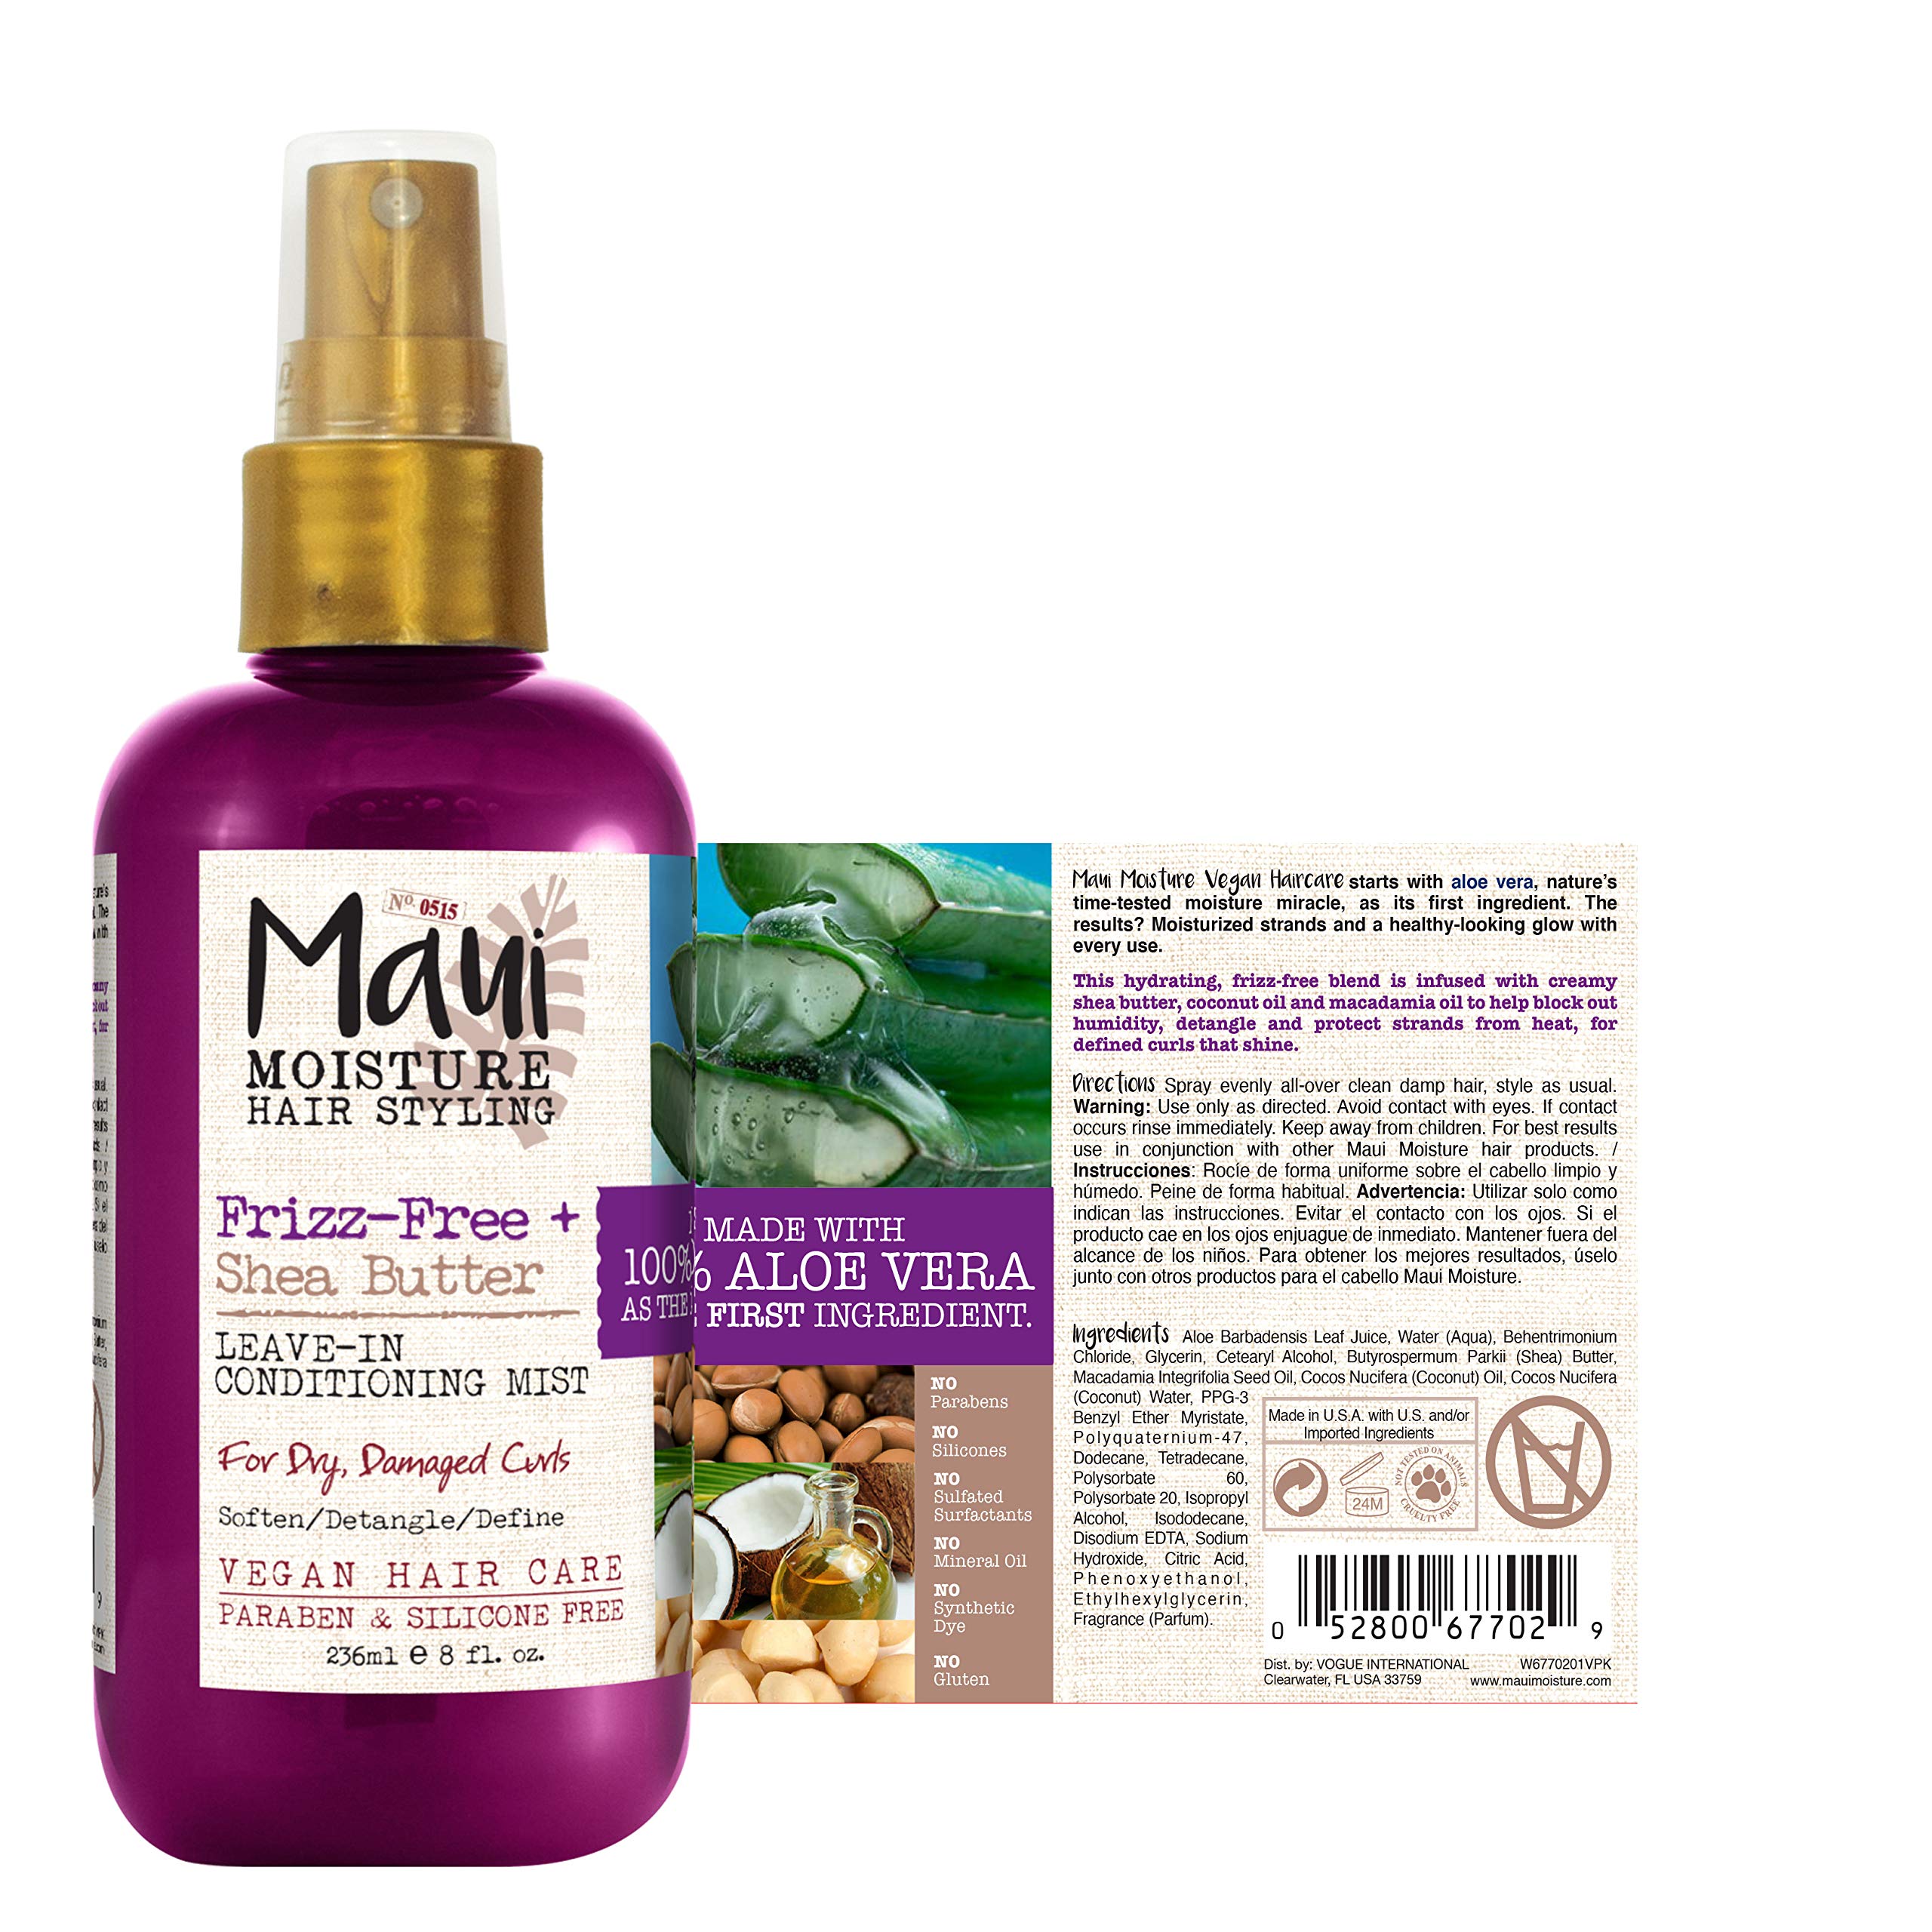 Maui Moisture Frizz-Free + Shea Butter Leave-in Conditioning Mist, Curly Hair Styling, No Drying Alcohols, Parabens or Silicone, 8 Fl Oz